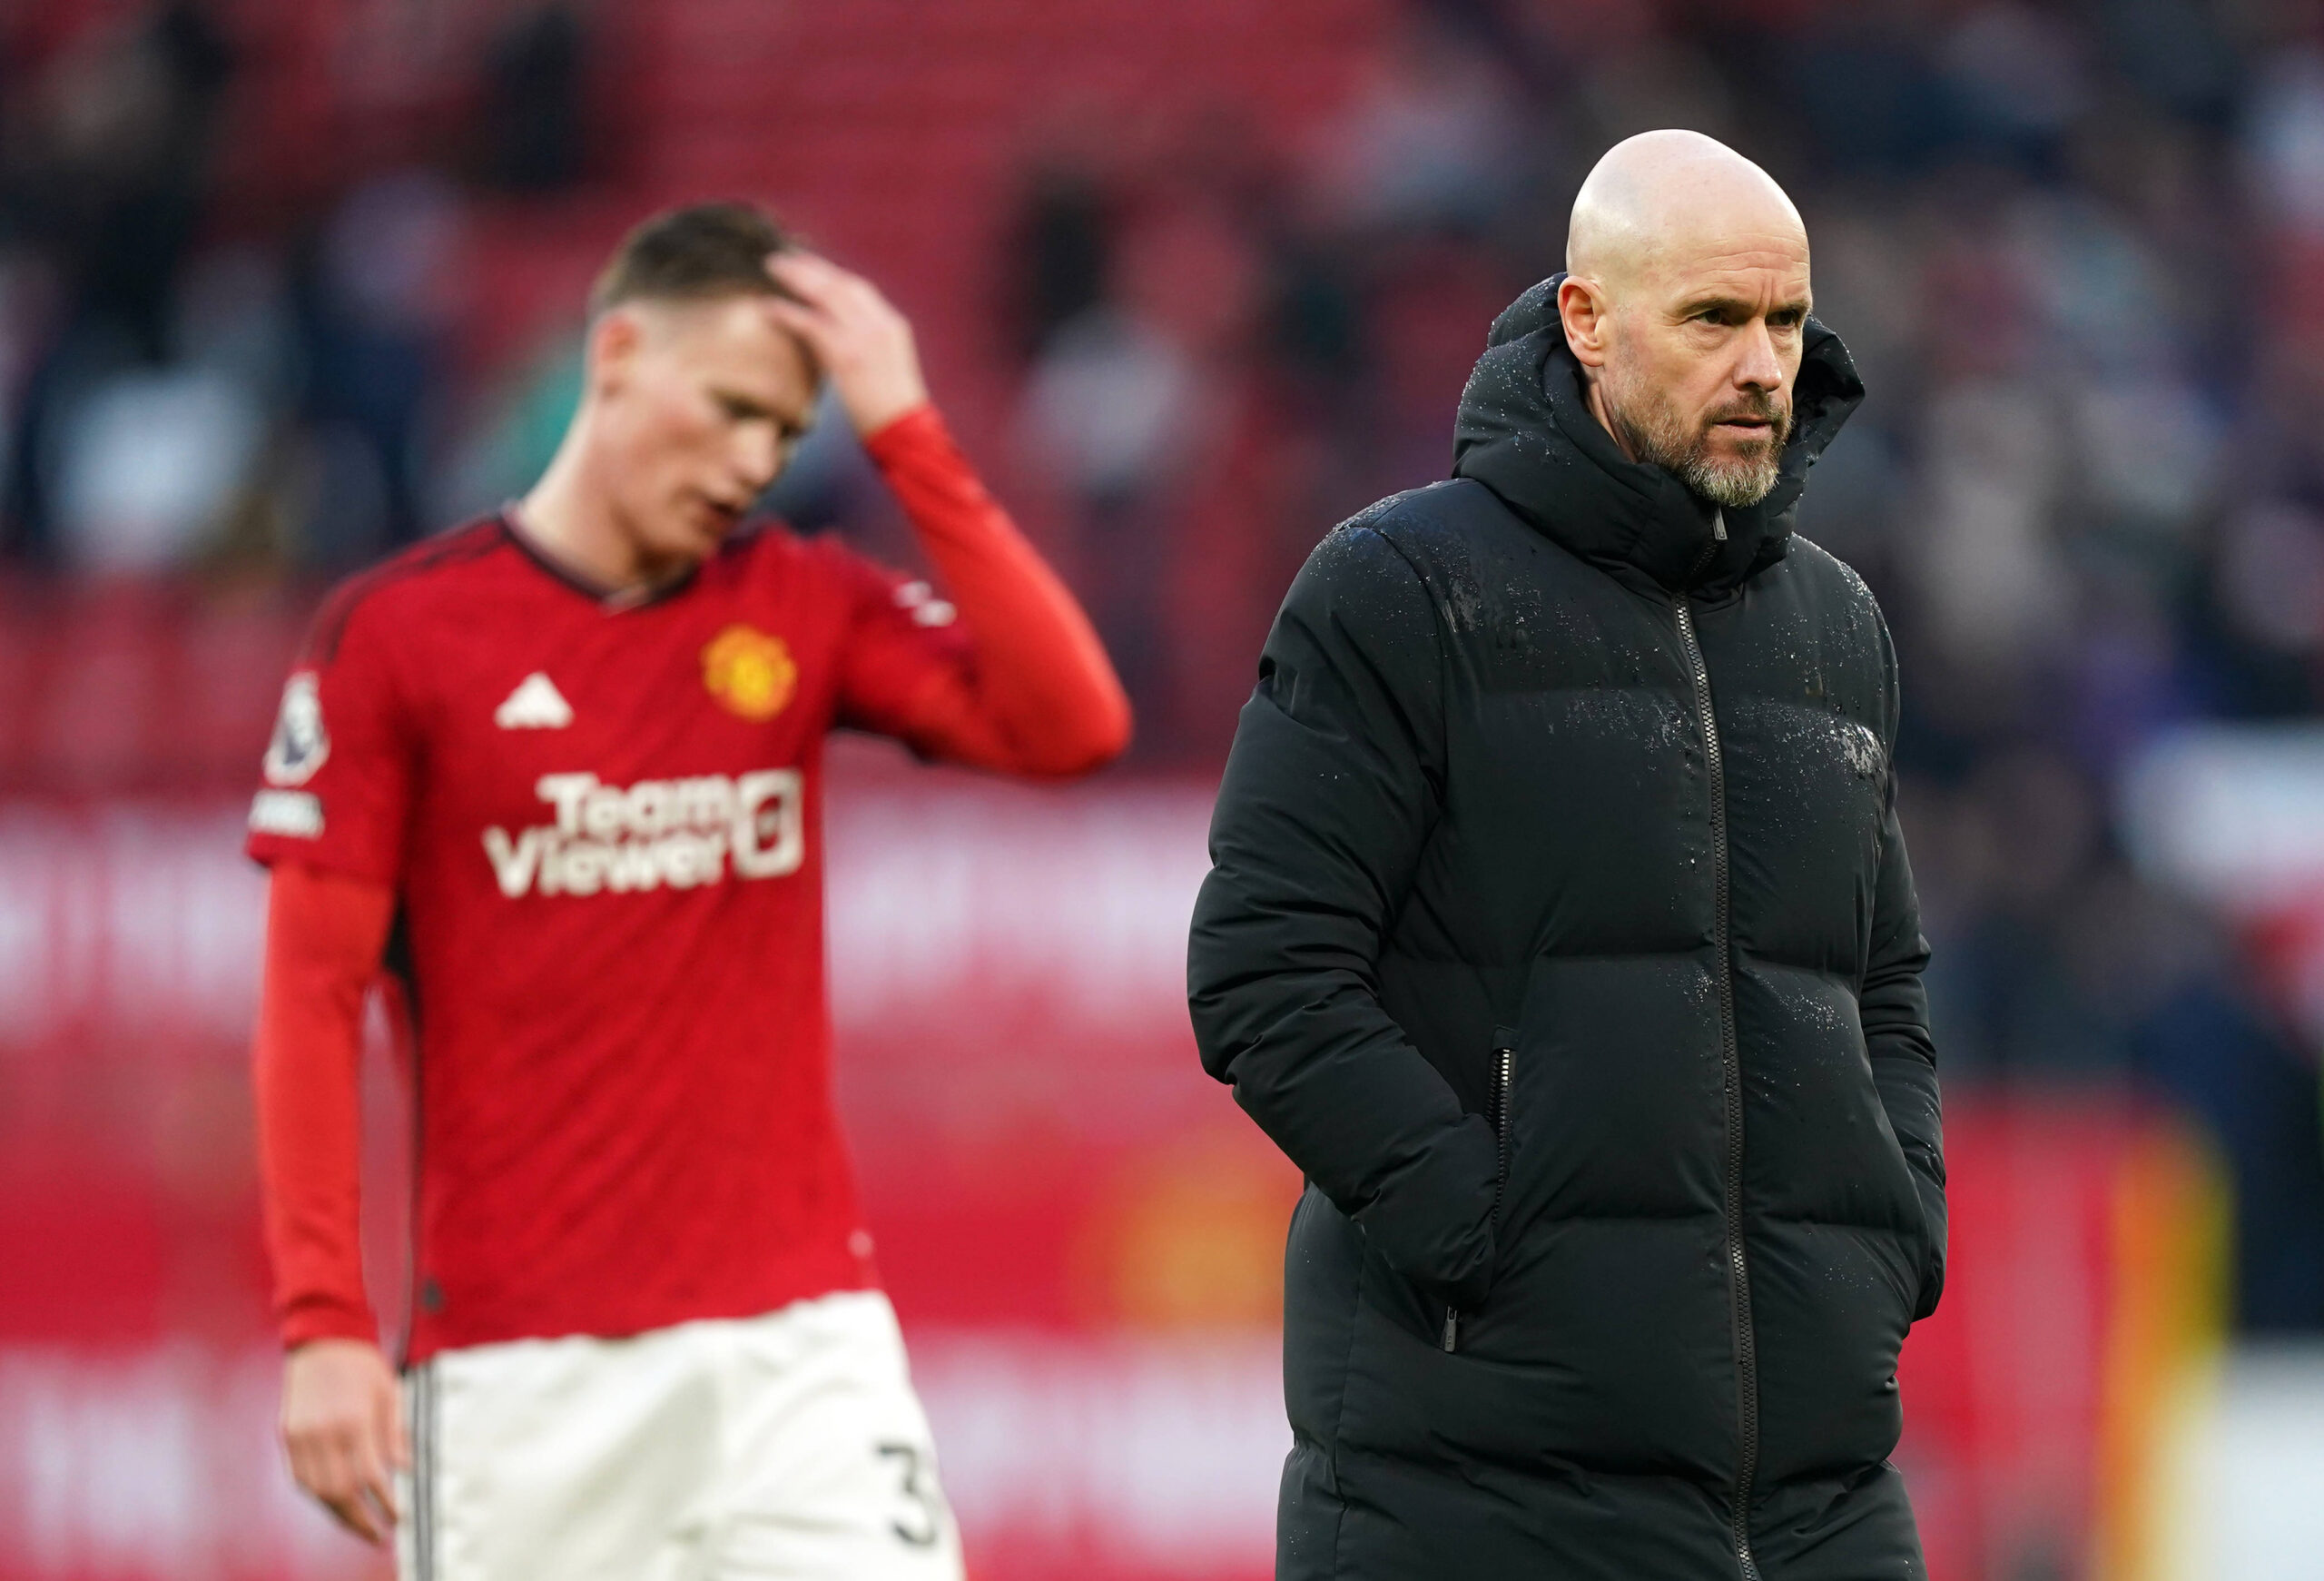 Fulham 2-1 Manchester United: Erik ten Hag walks off the pitch after defeat at Old Trafford